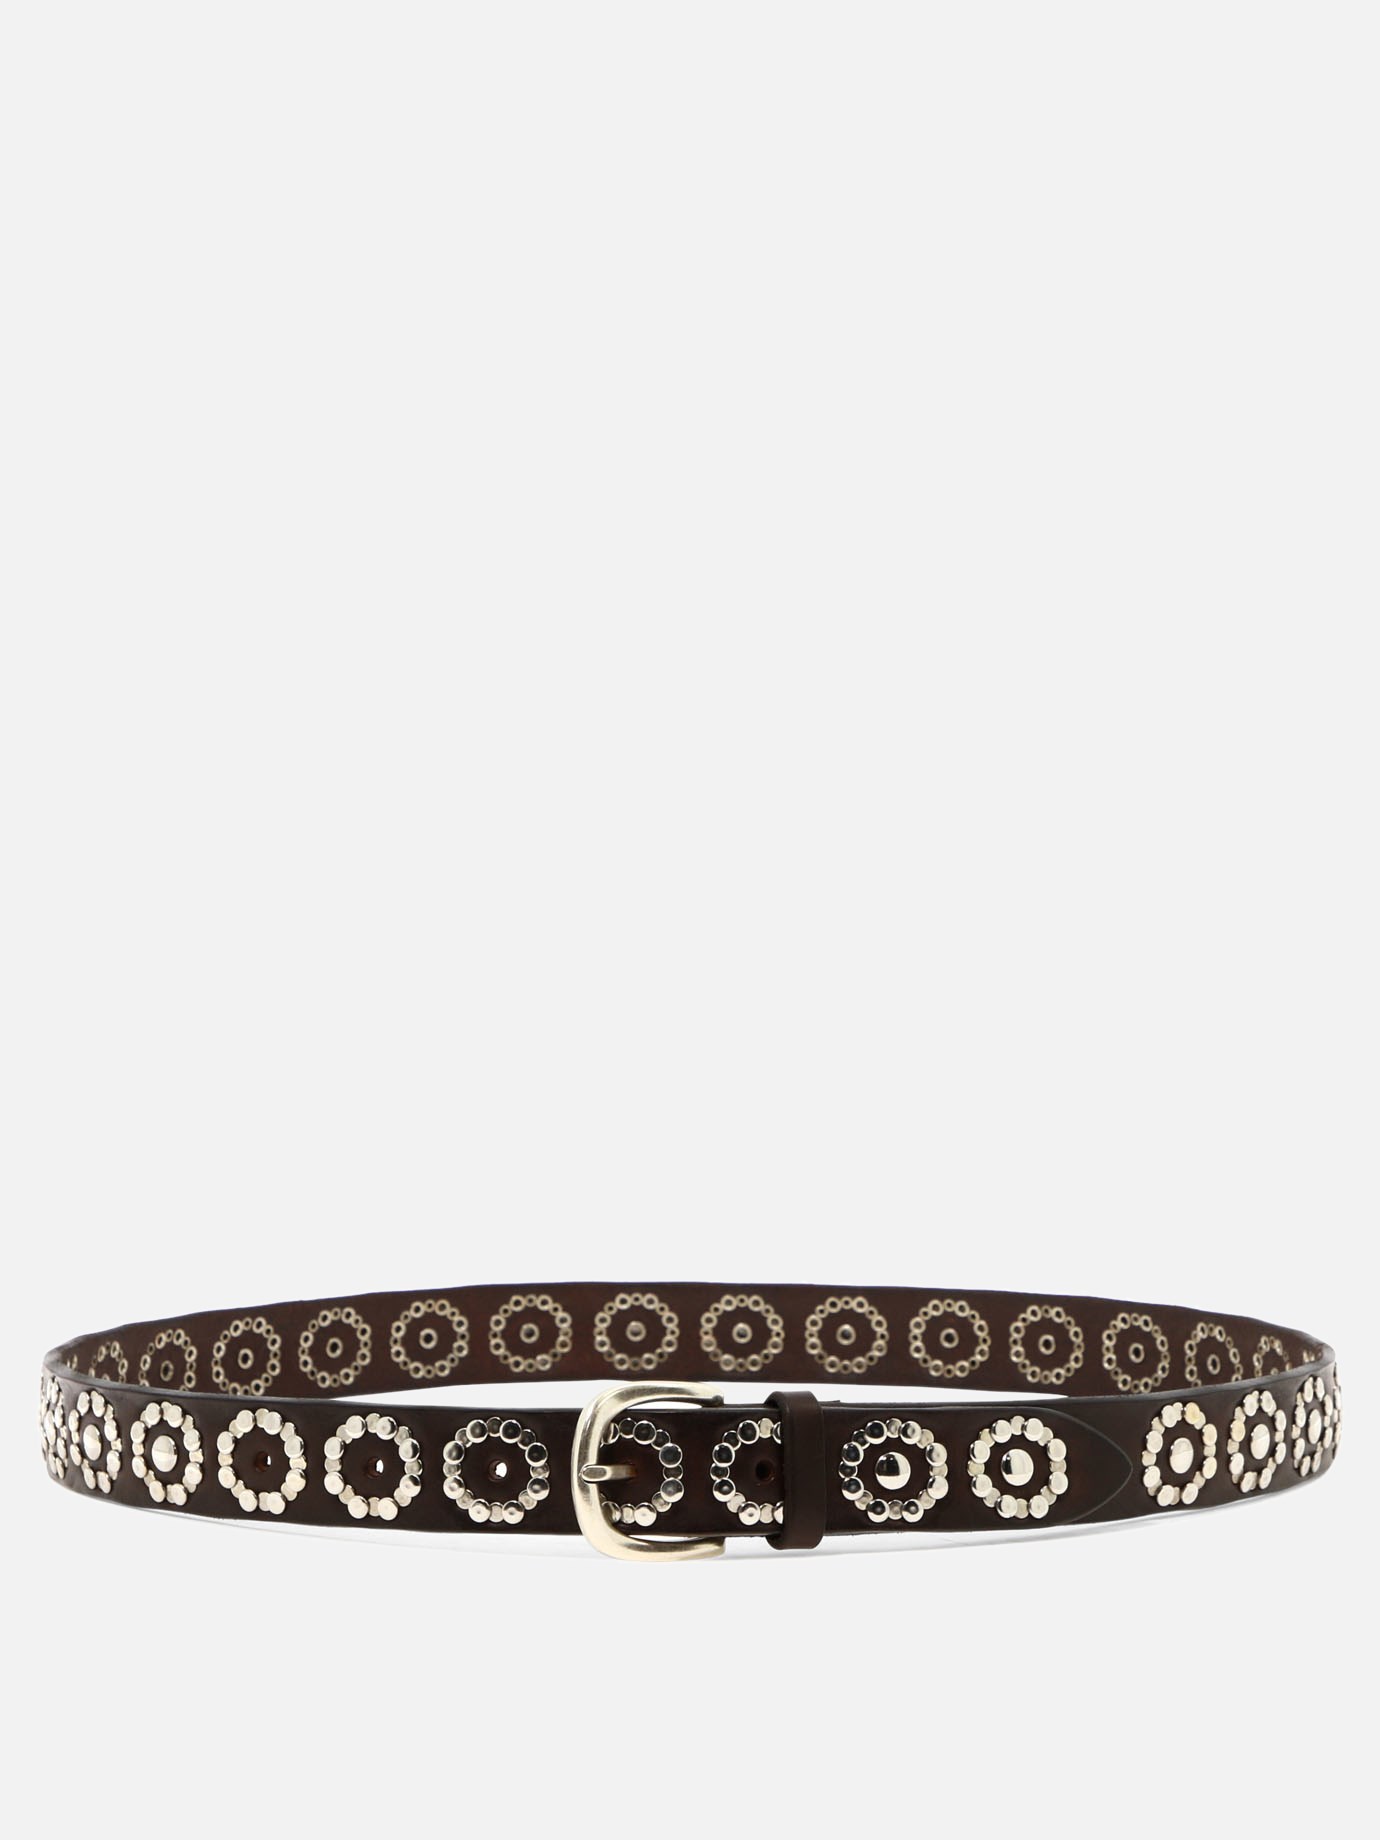 Belt with studs by Orciani